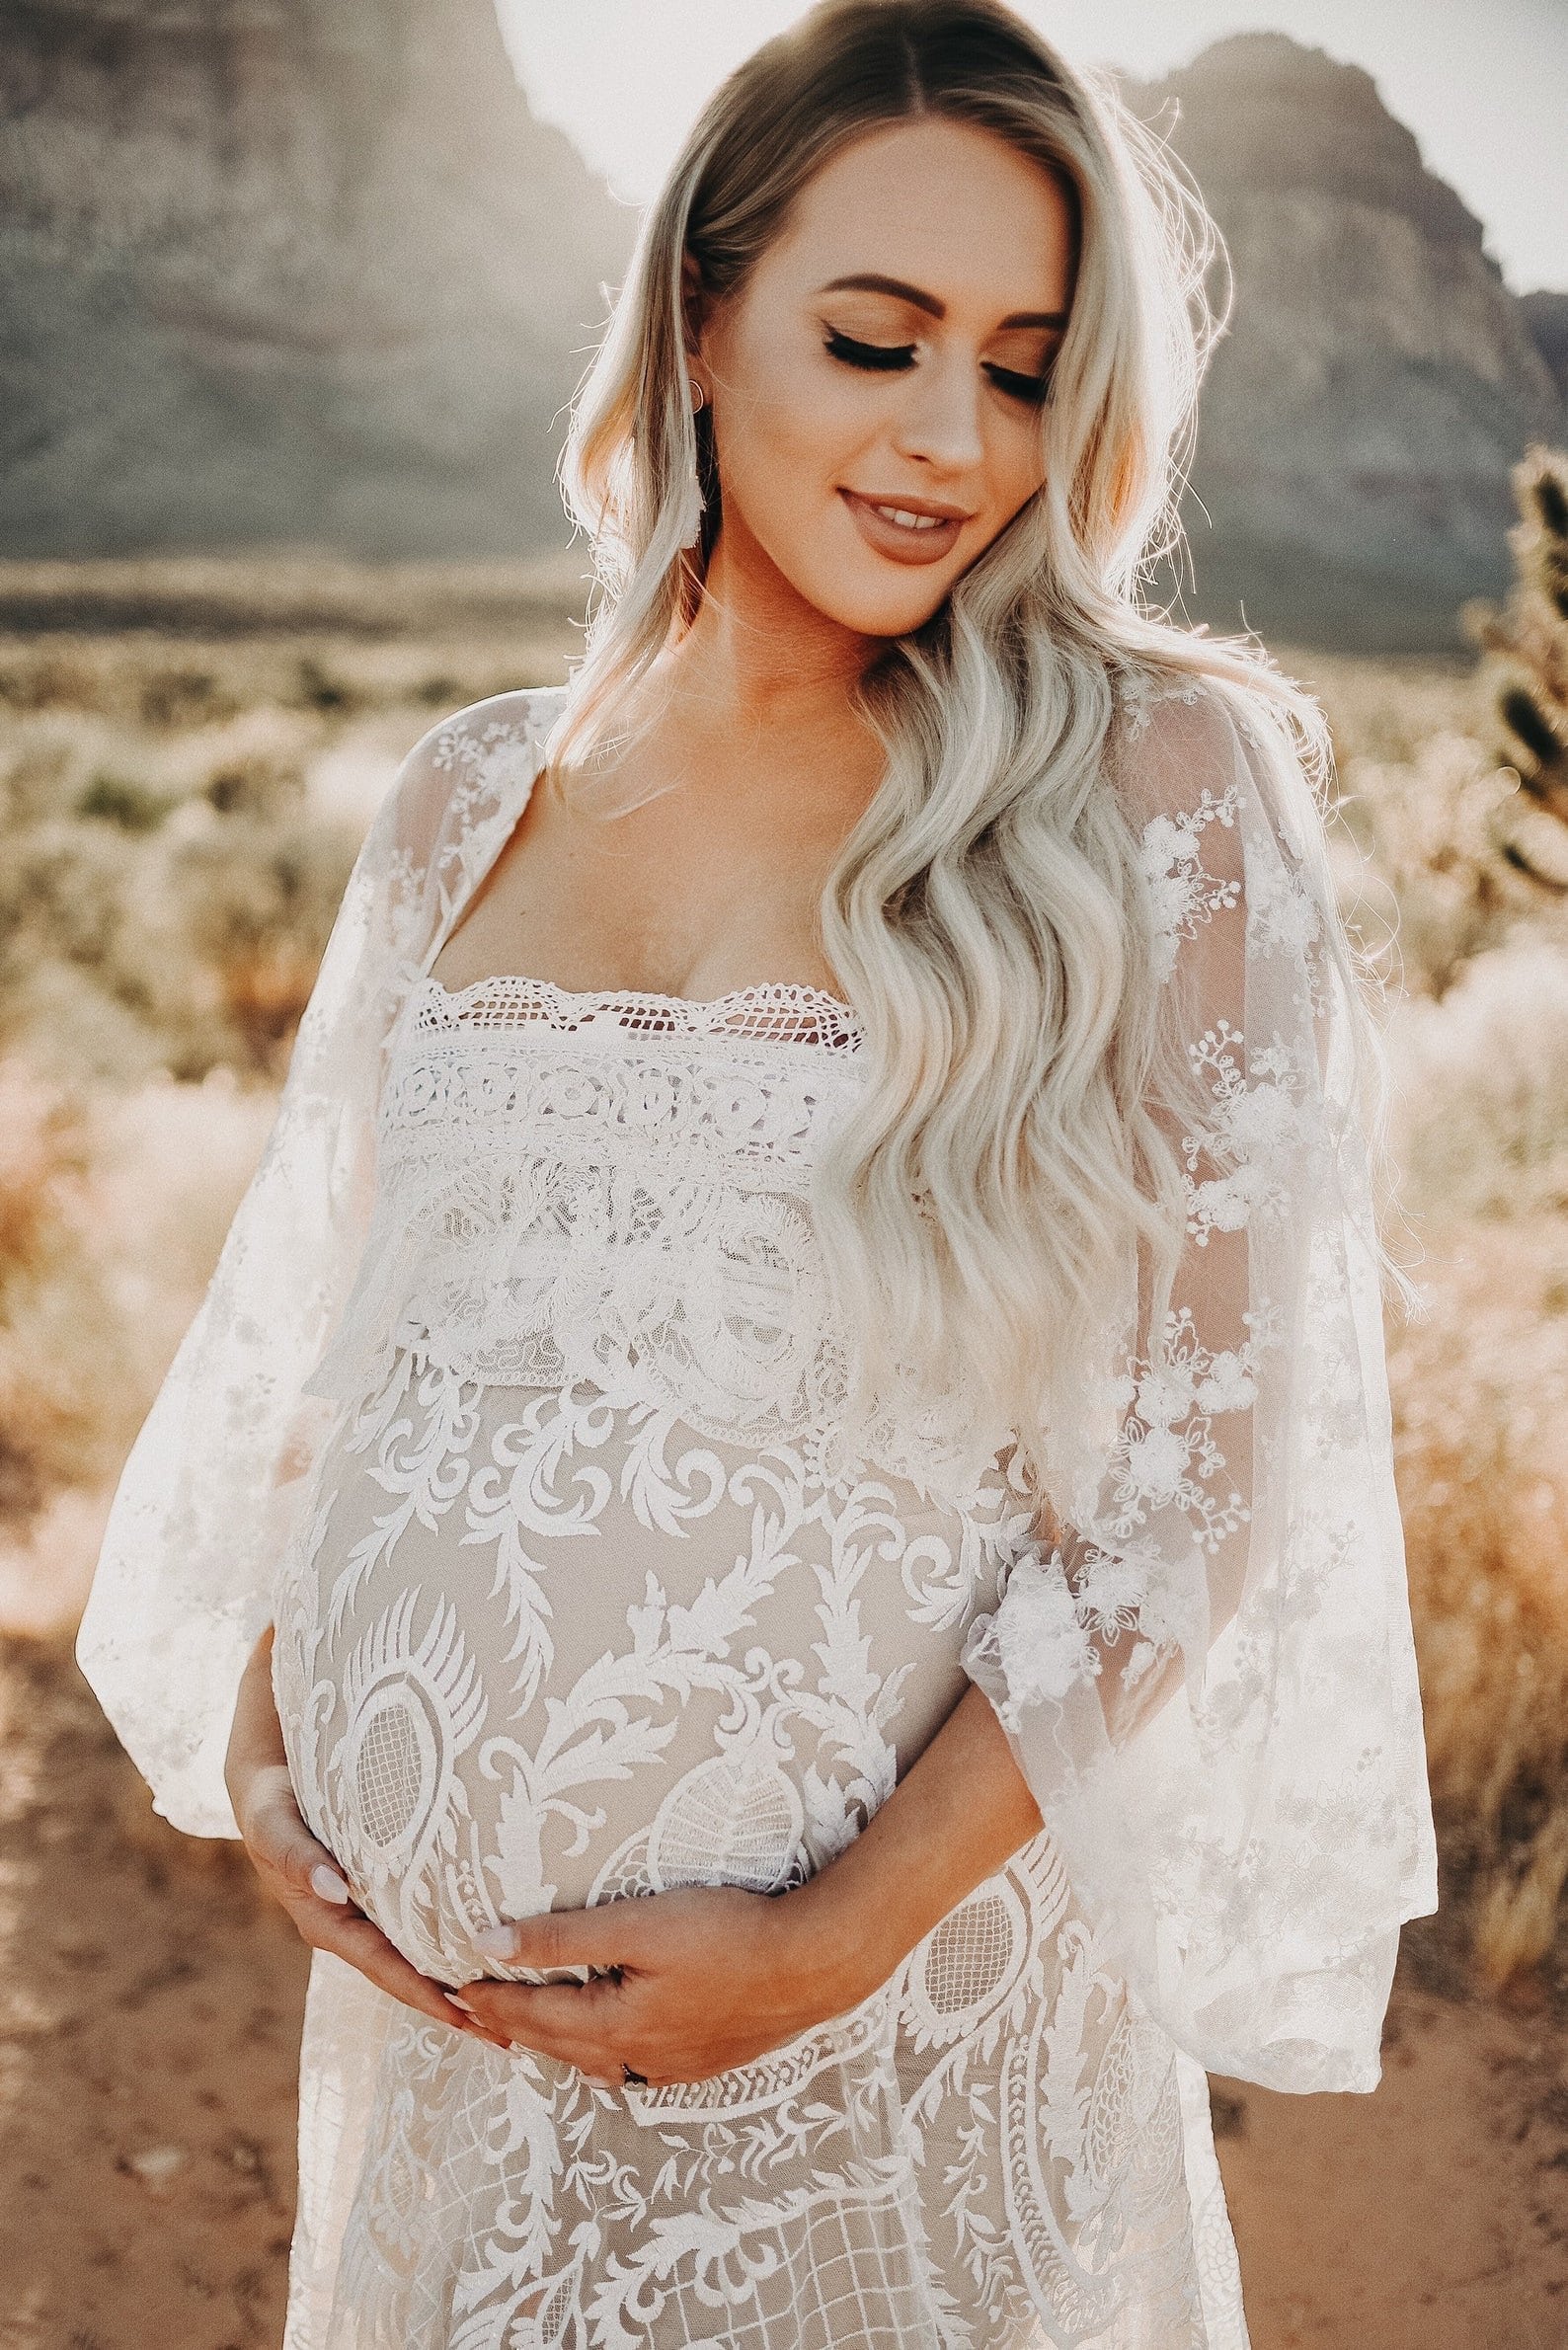 Maternity Wedding Dress Shopping Tips | SouthBound Bride